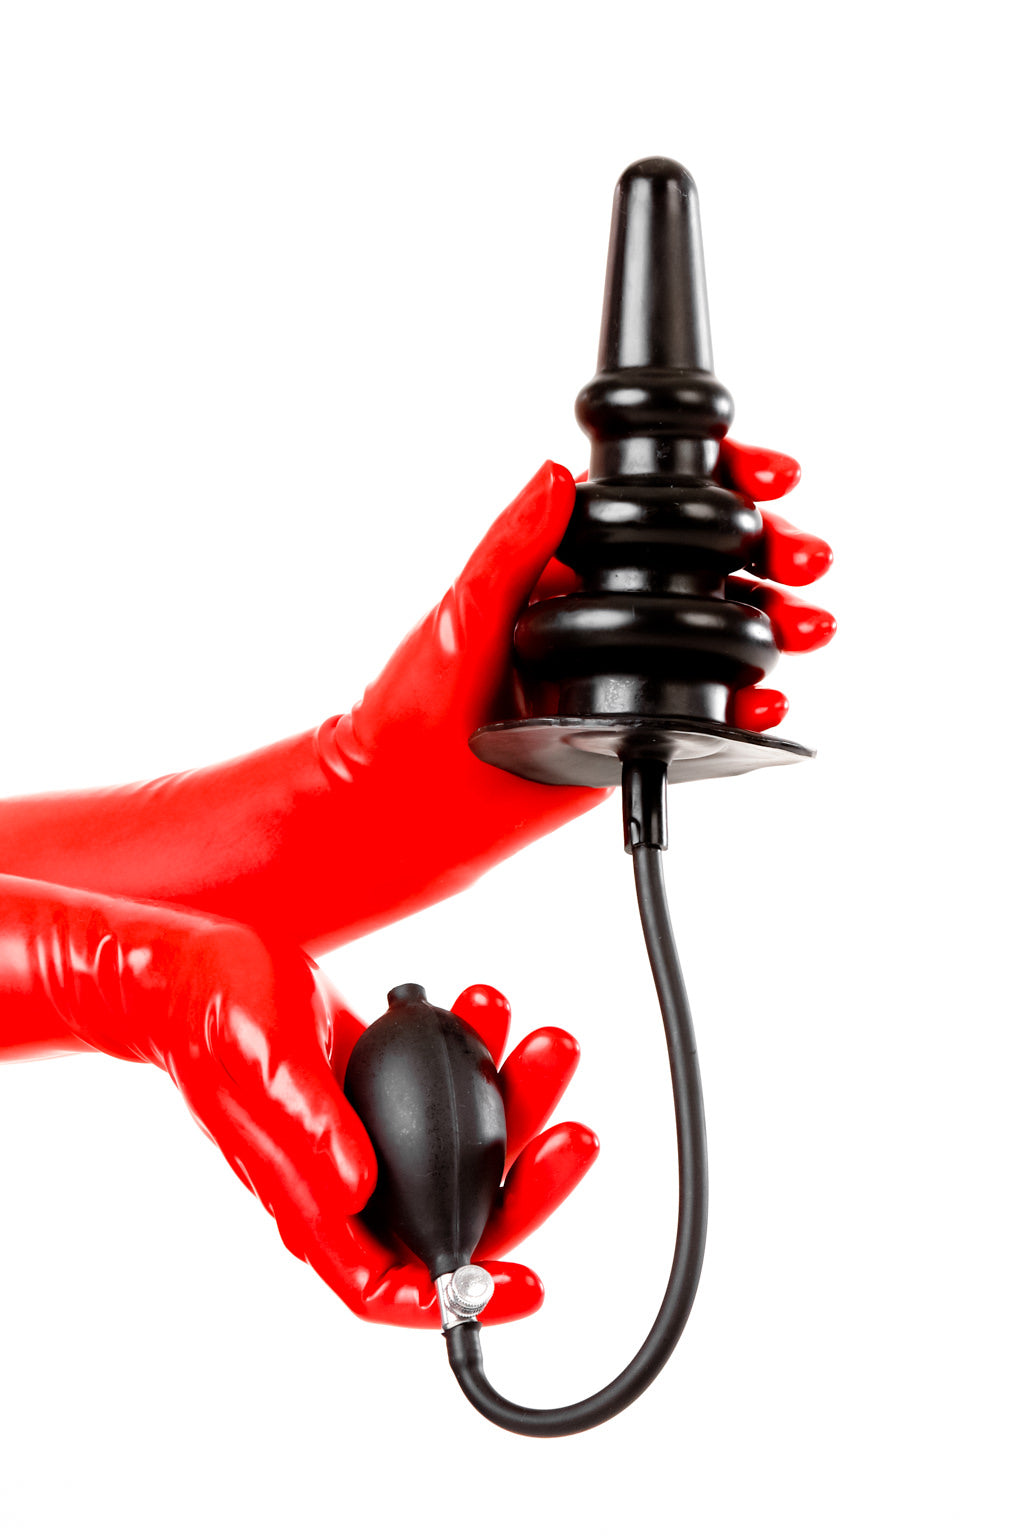 Red latex gloves holding an extra large ribbed butt plug.